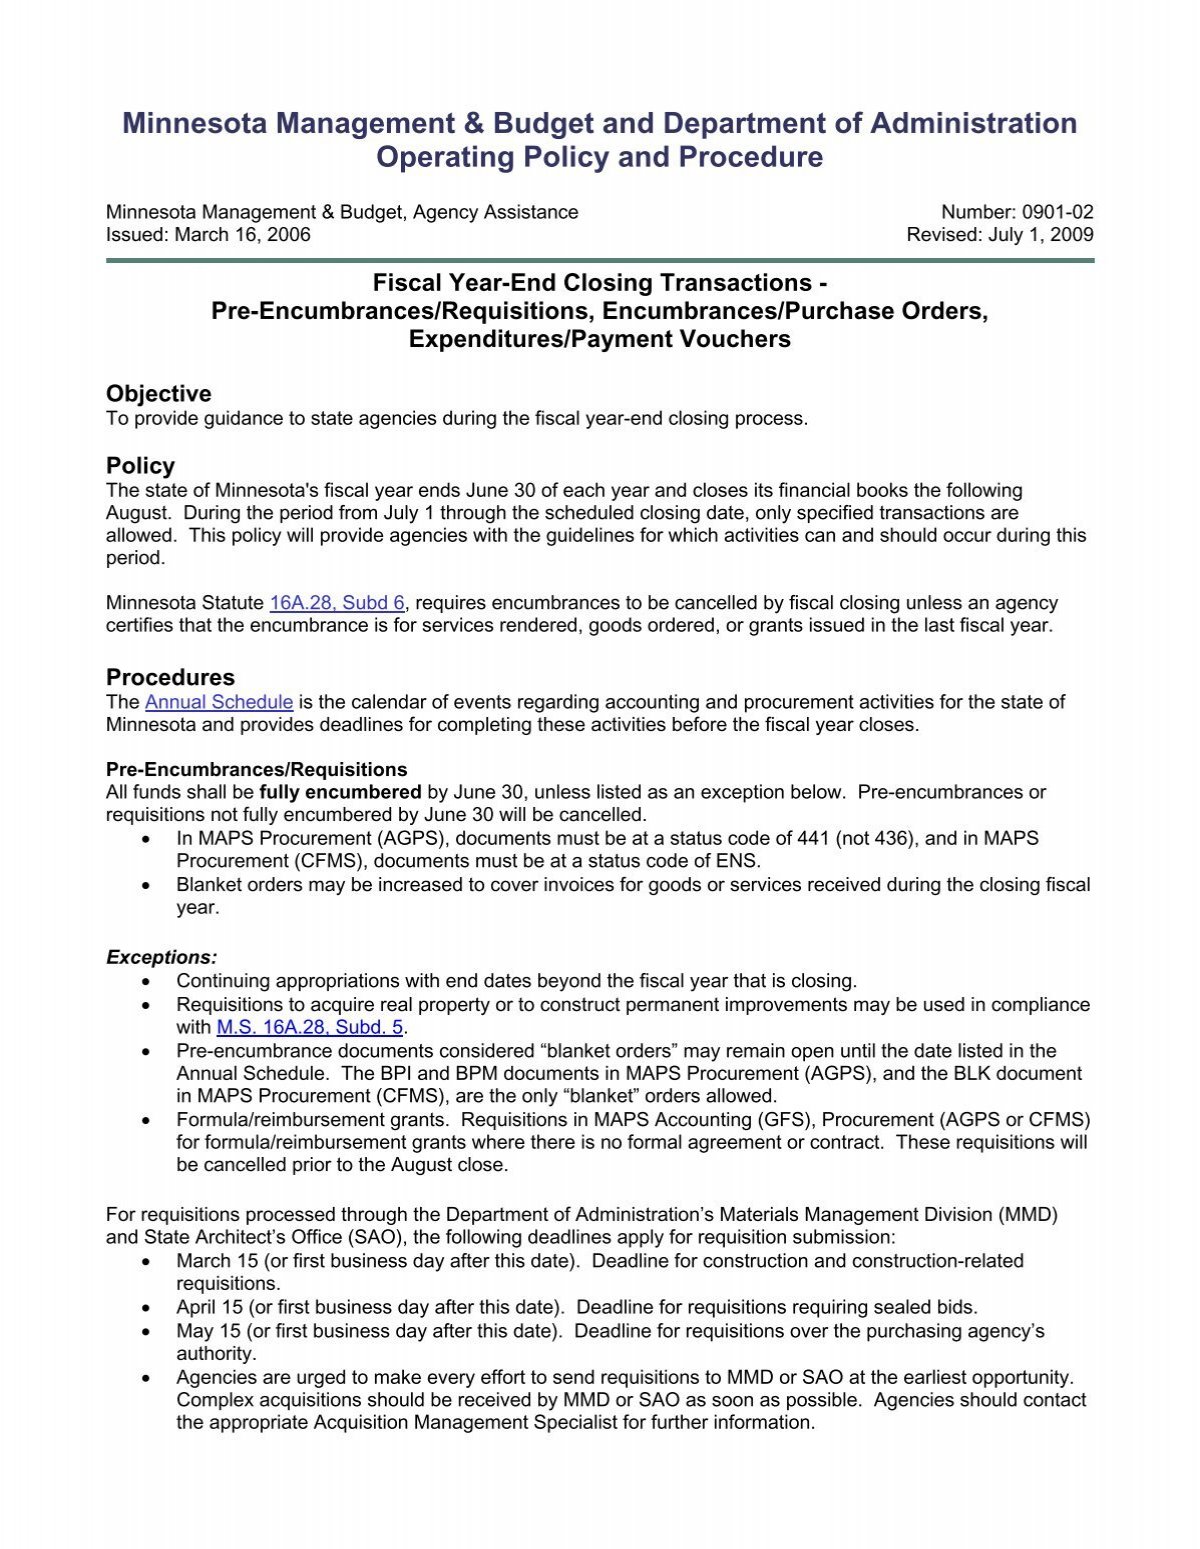 0901-02-fiscal-year-end-closing-transactions-minnesota